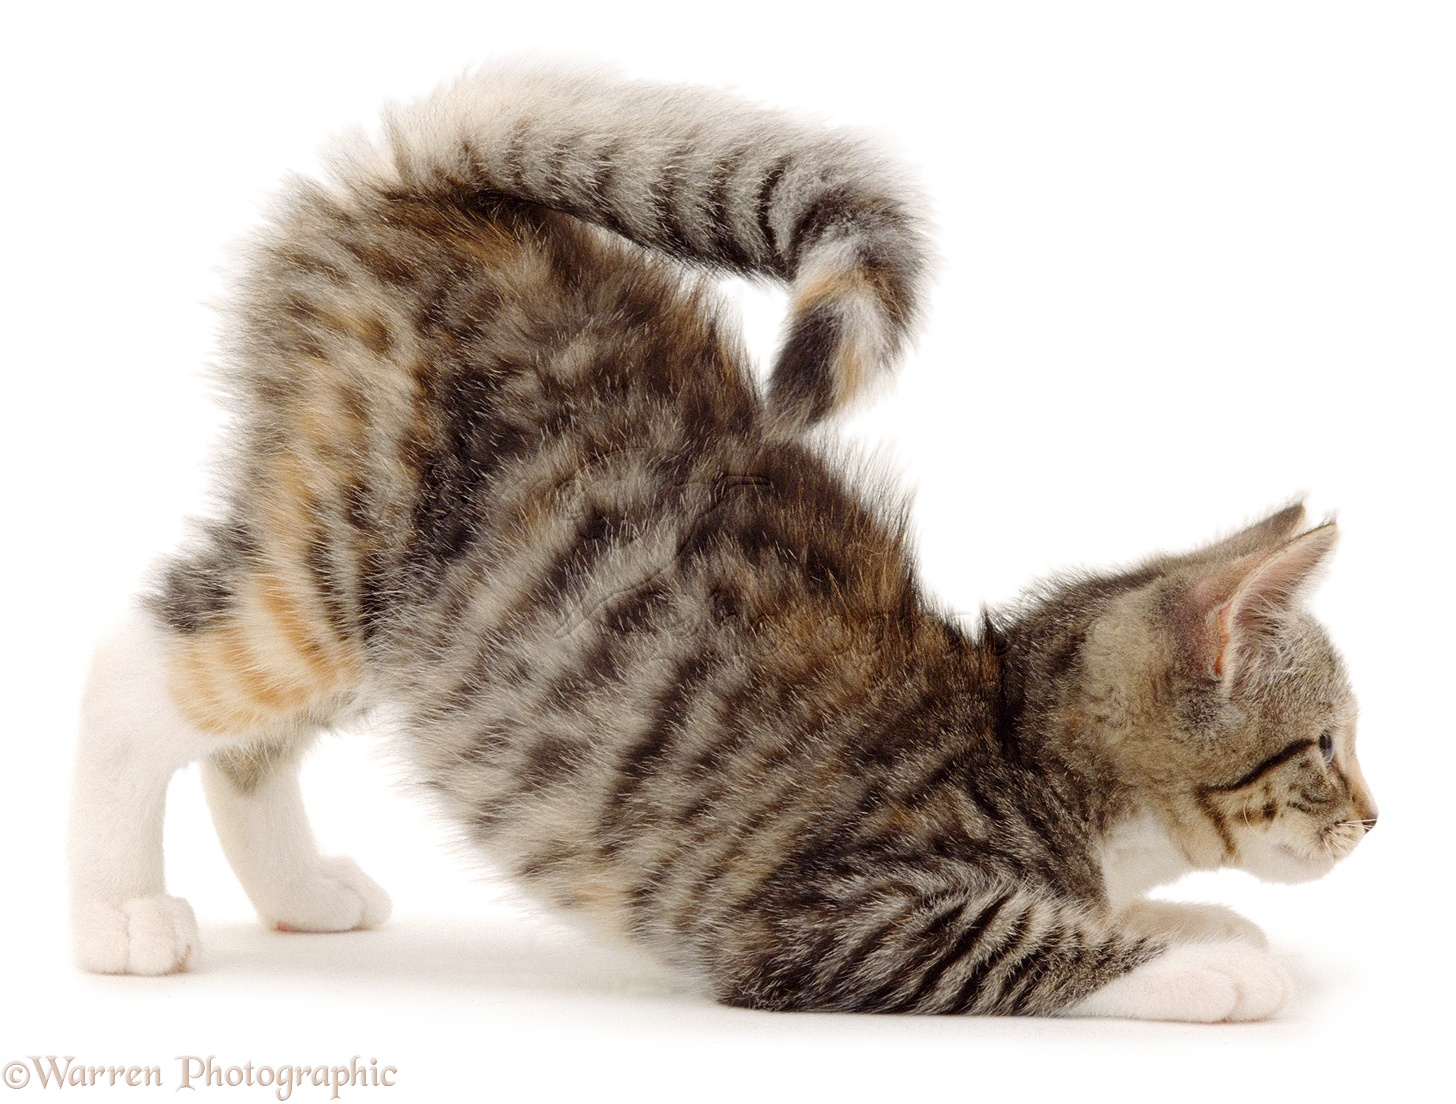  Kitten  in play bow photo WP02741